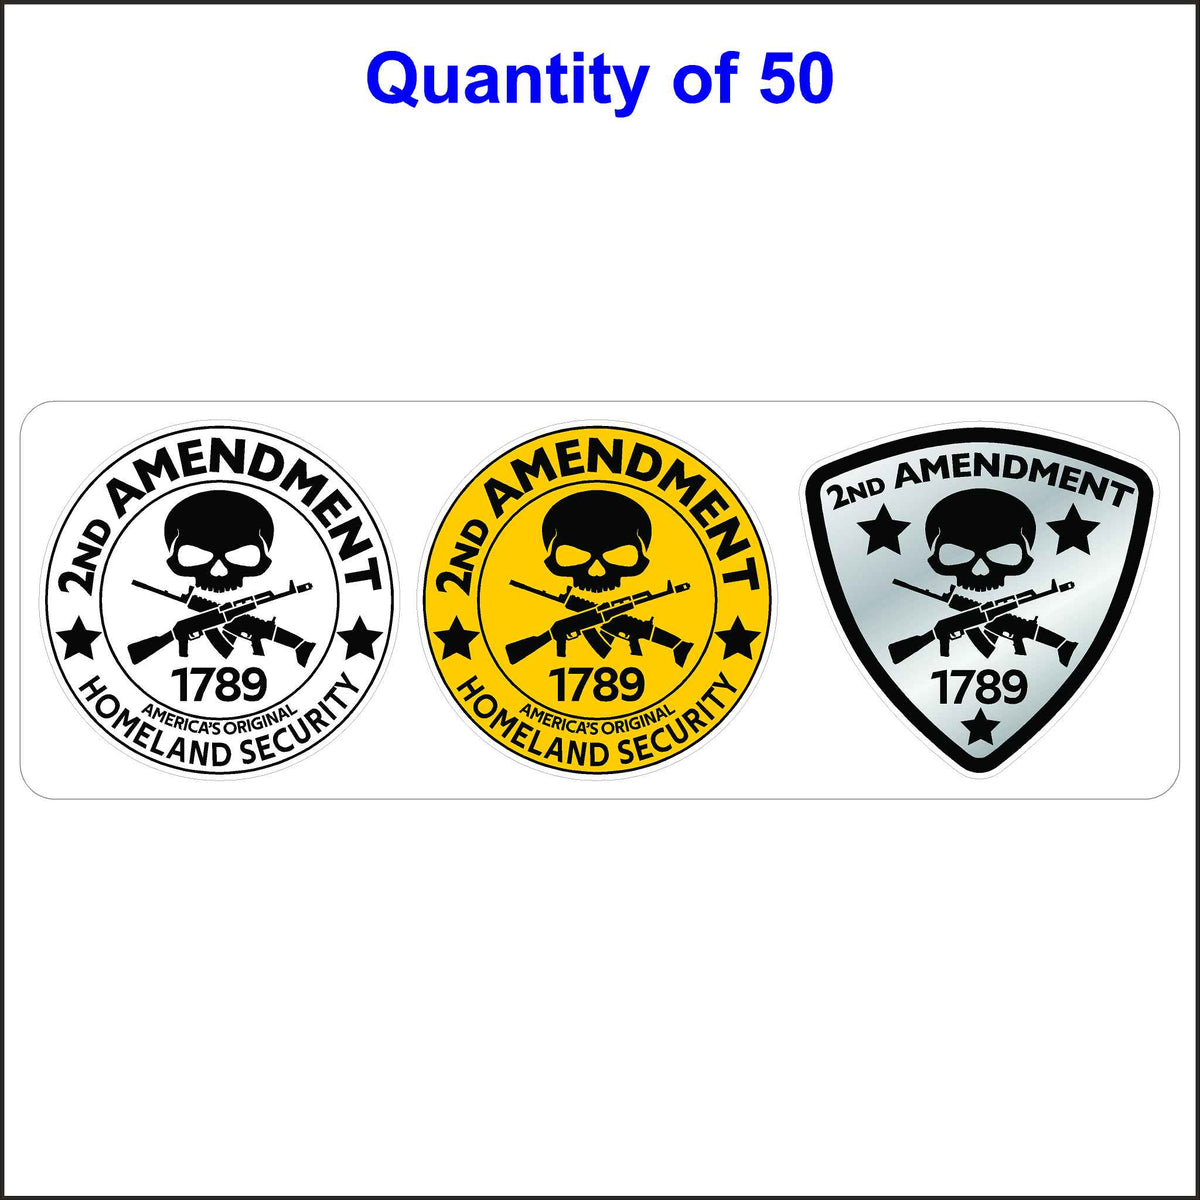 Second Amendment Sticker With Skulls 3 Pack. 3 Different 2nd Amendment Stickers One of Each in White, Yellow and Gray All With Black Letters. Quantity of 50, 3 packs.